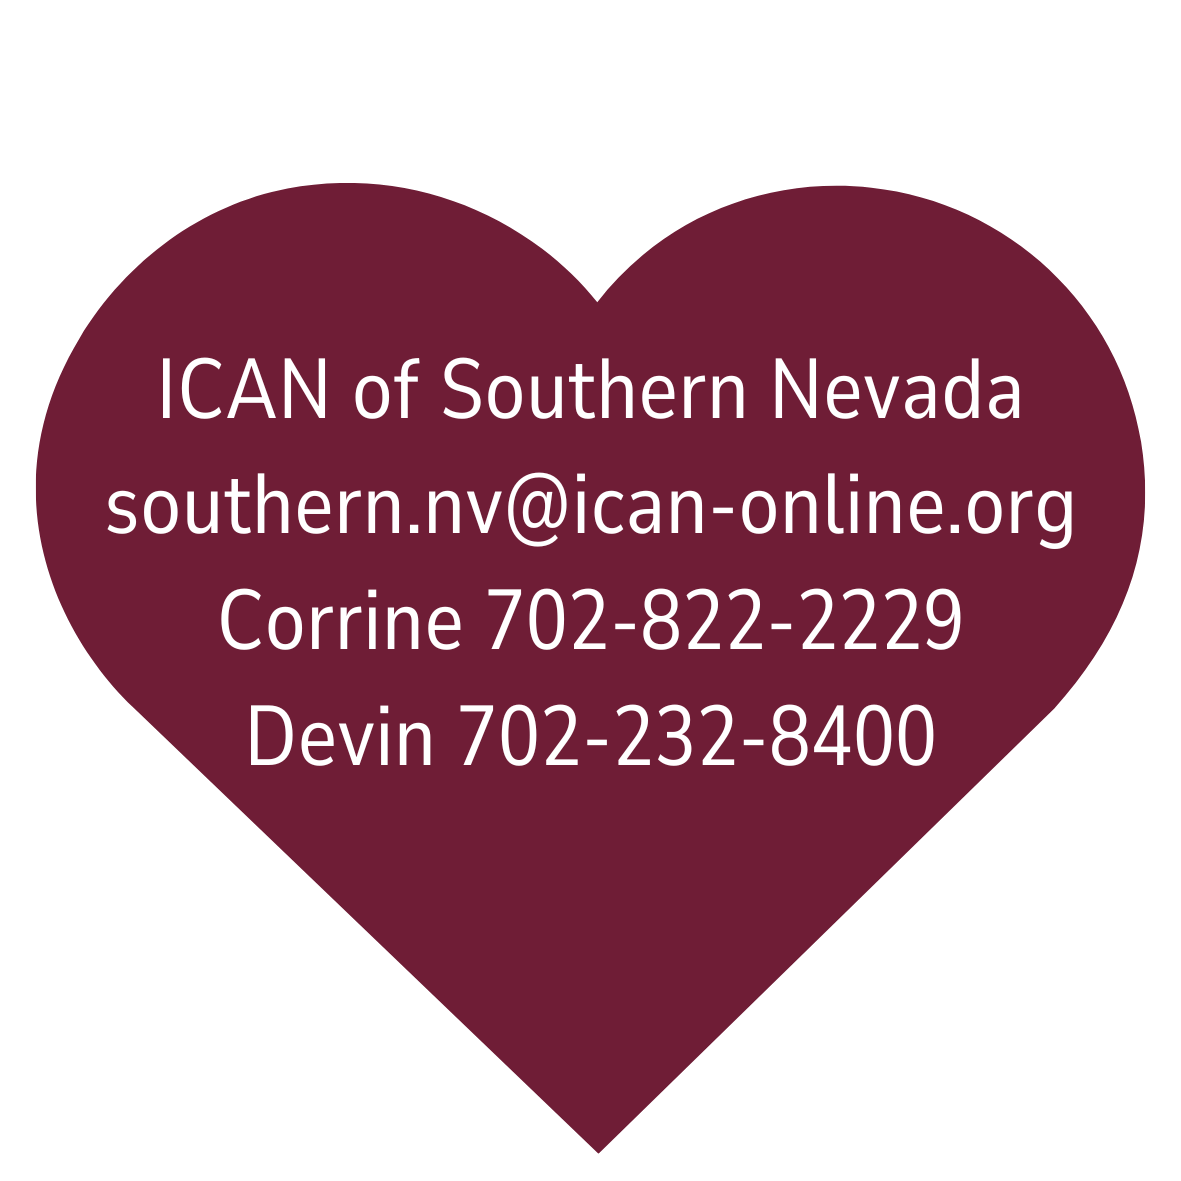 ICAN of Southern Nevada